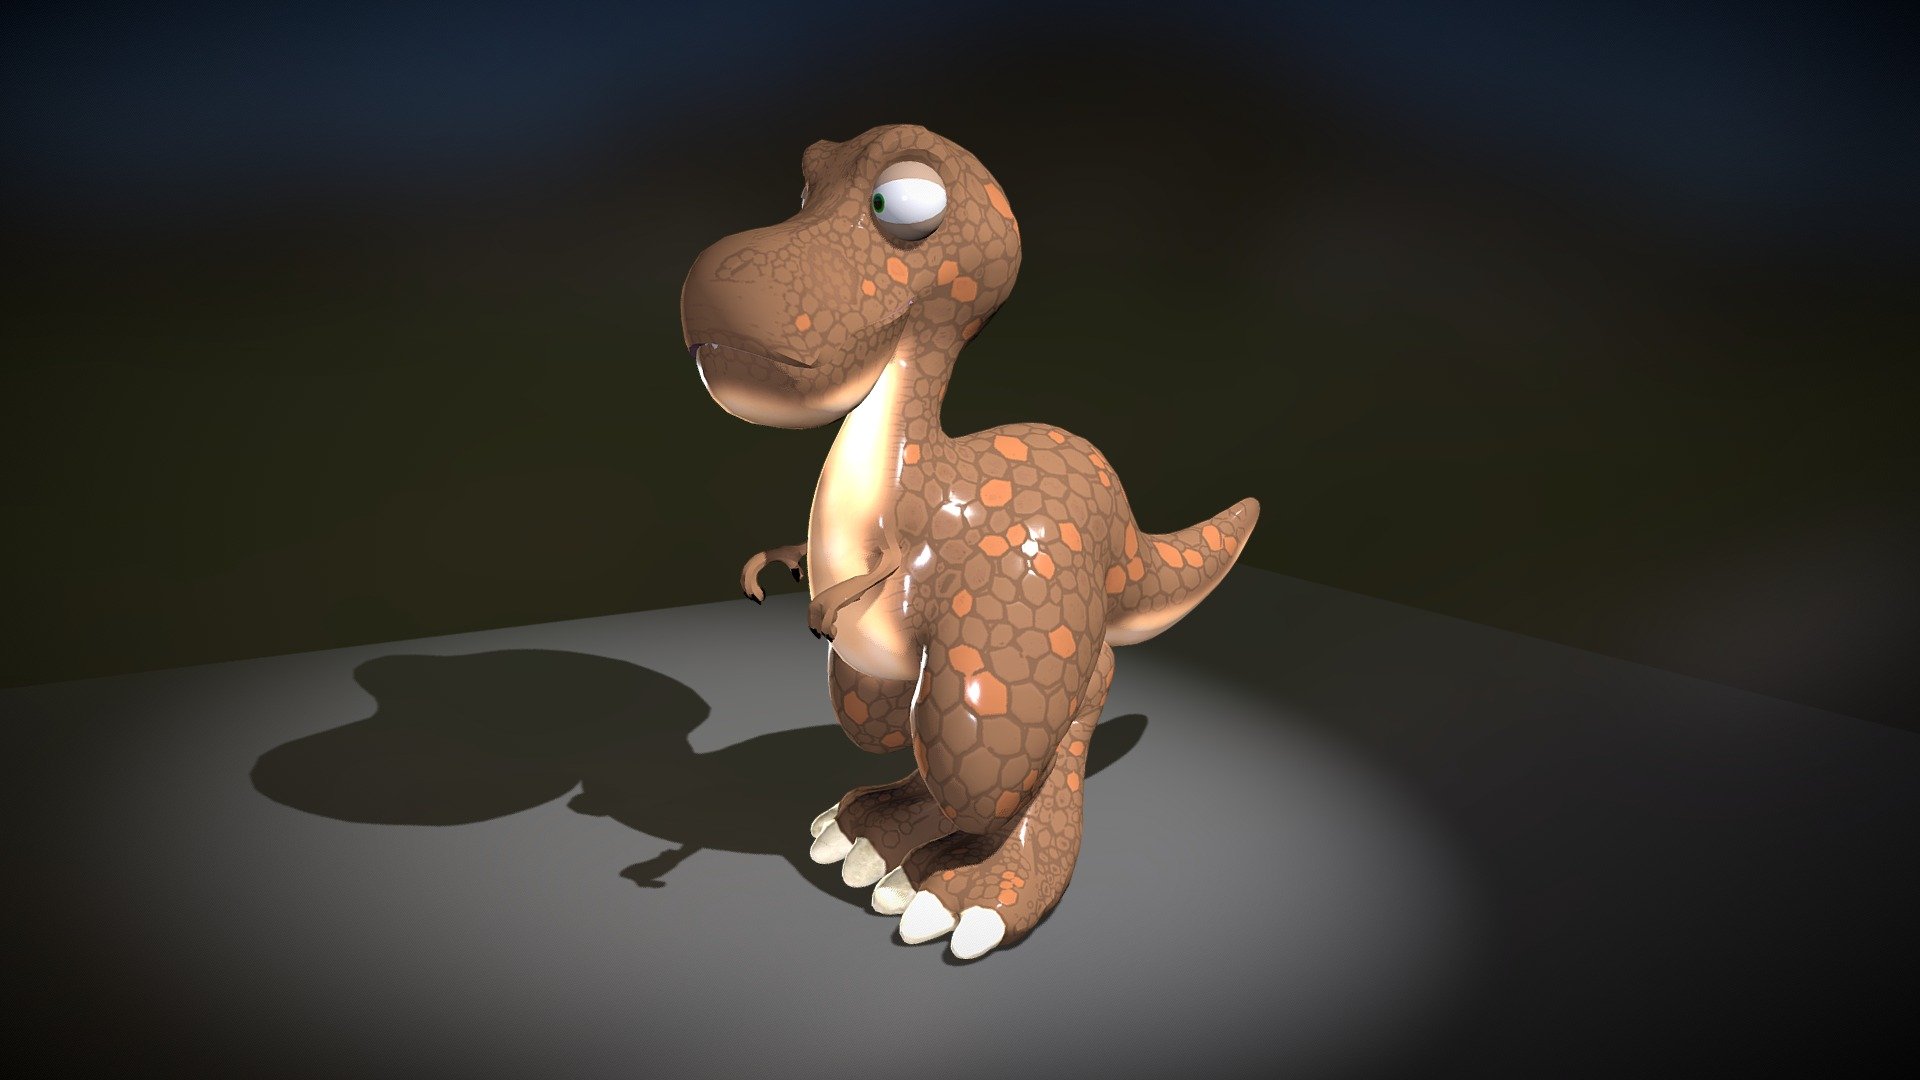 Larry (Rigged)

Meet Larrrrrry! A fully rigged cartoon dinosaur ready for animation. Please note that rig control curves do not render. Character is 3 feet tall but can be scaled to any size. When scaled the displacement map and the rig automatically update so you can focus on animation!  

This file contains a Maya 2018 file (rigged version) and this animation 3d model